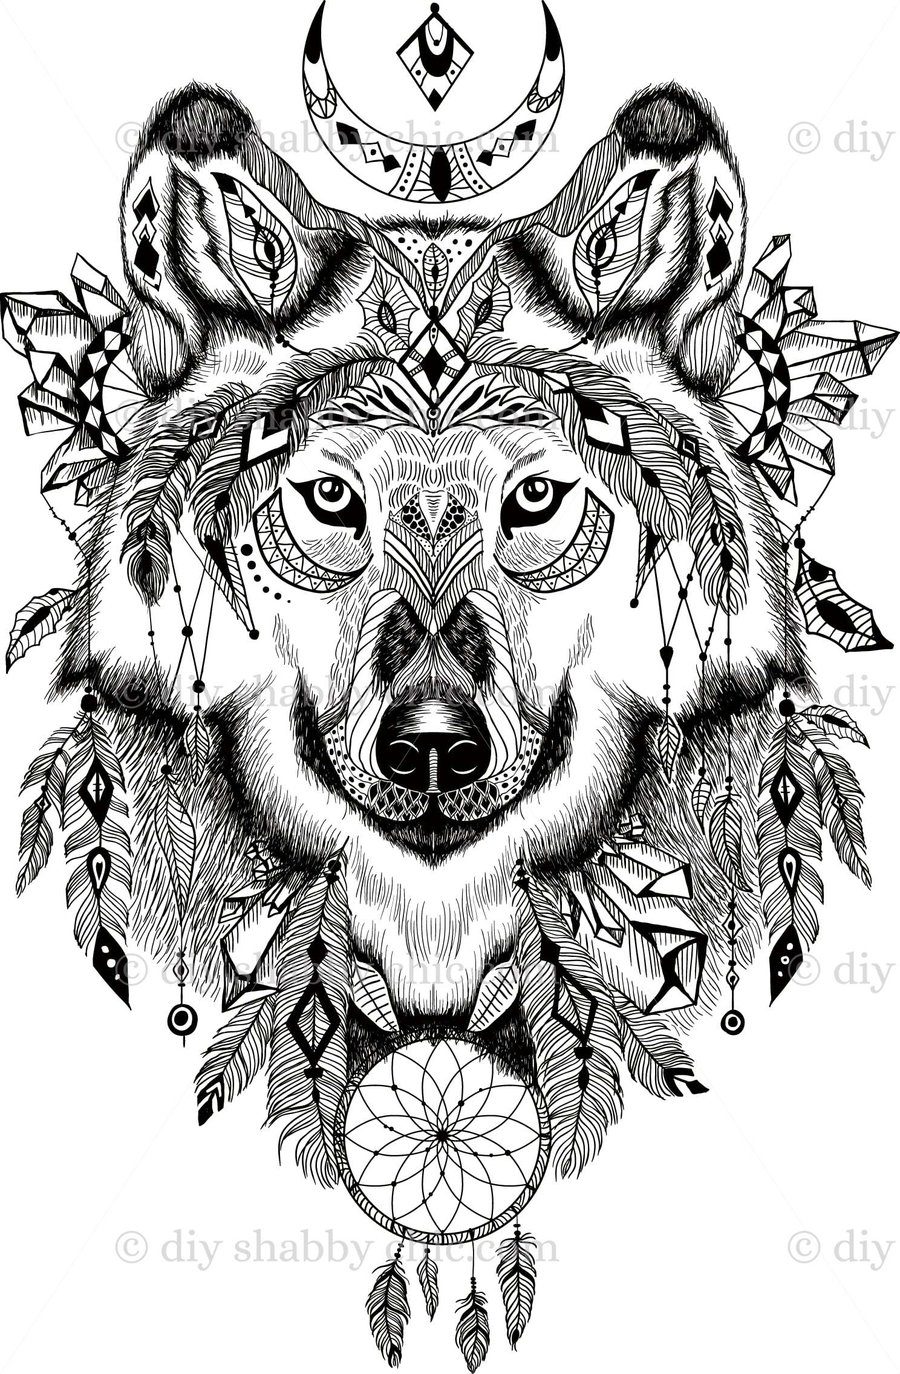 Waterslide Wood Furniture Decal Vintage Image Transfer Shabby Chic Indian Wolf